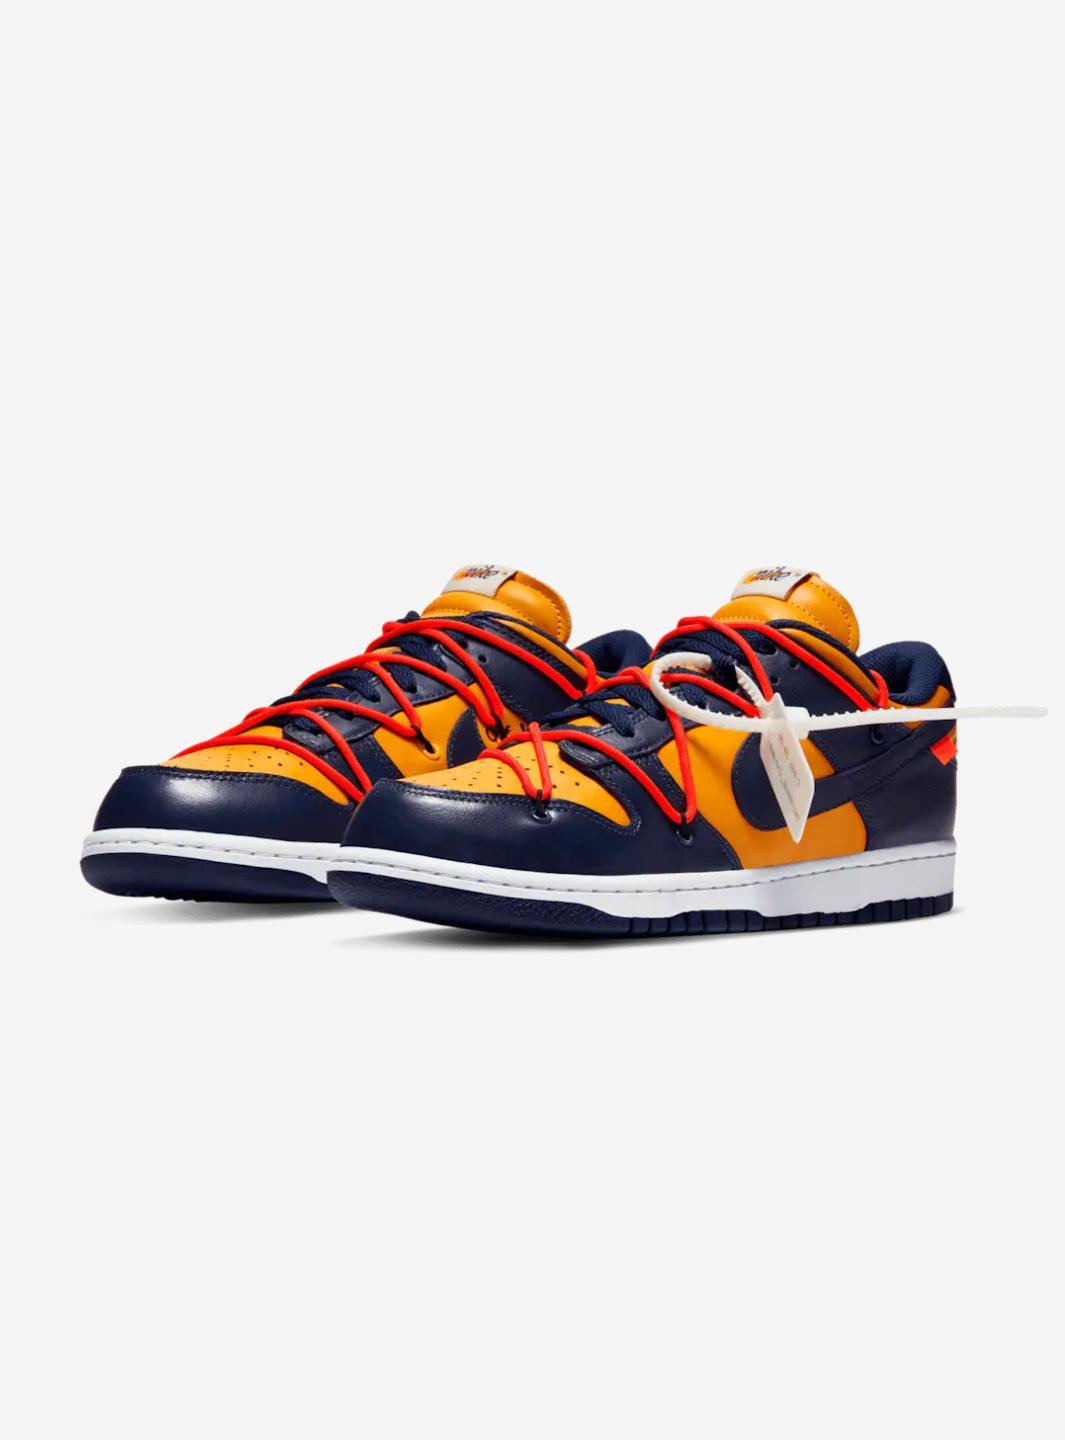 Nike Dunk Low Off-White University Gold - CT0856-700 | ResellZone